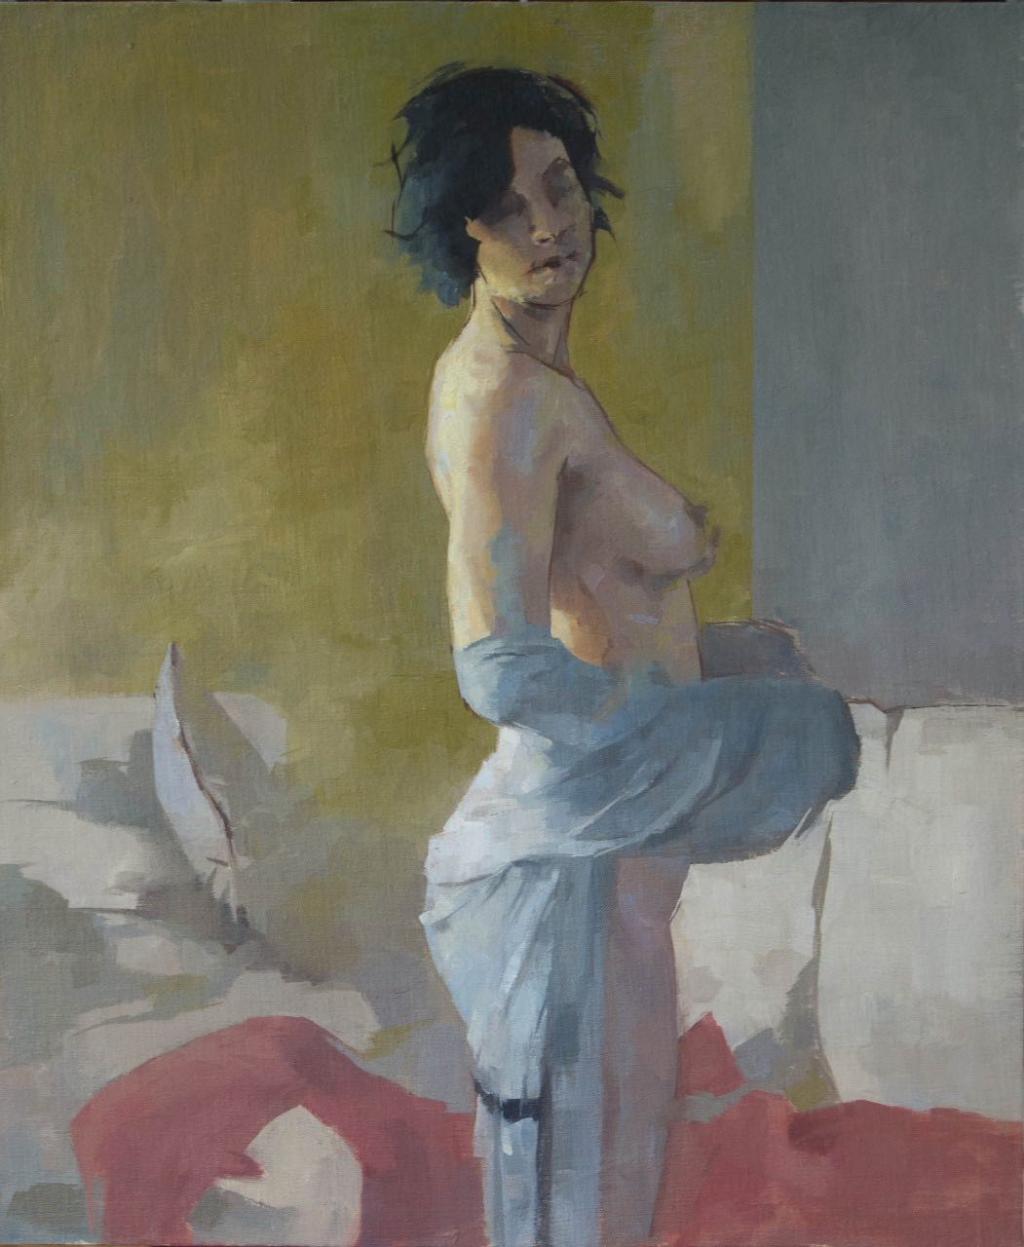 A painting by Julian Tejera of a woman whose robe has fallen down around her waist.